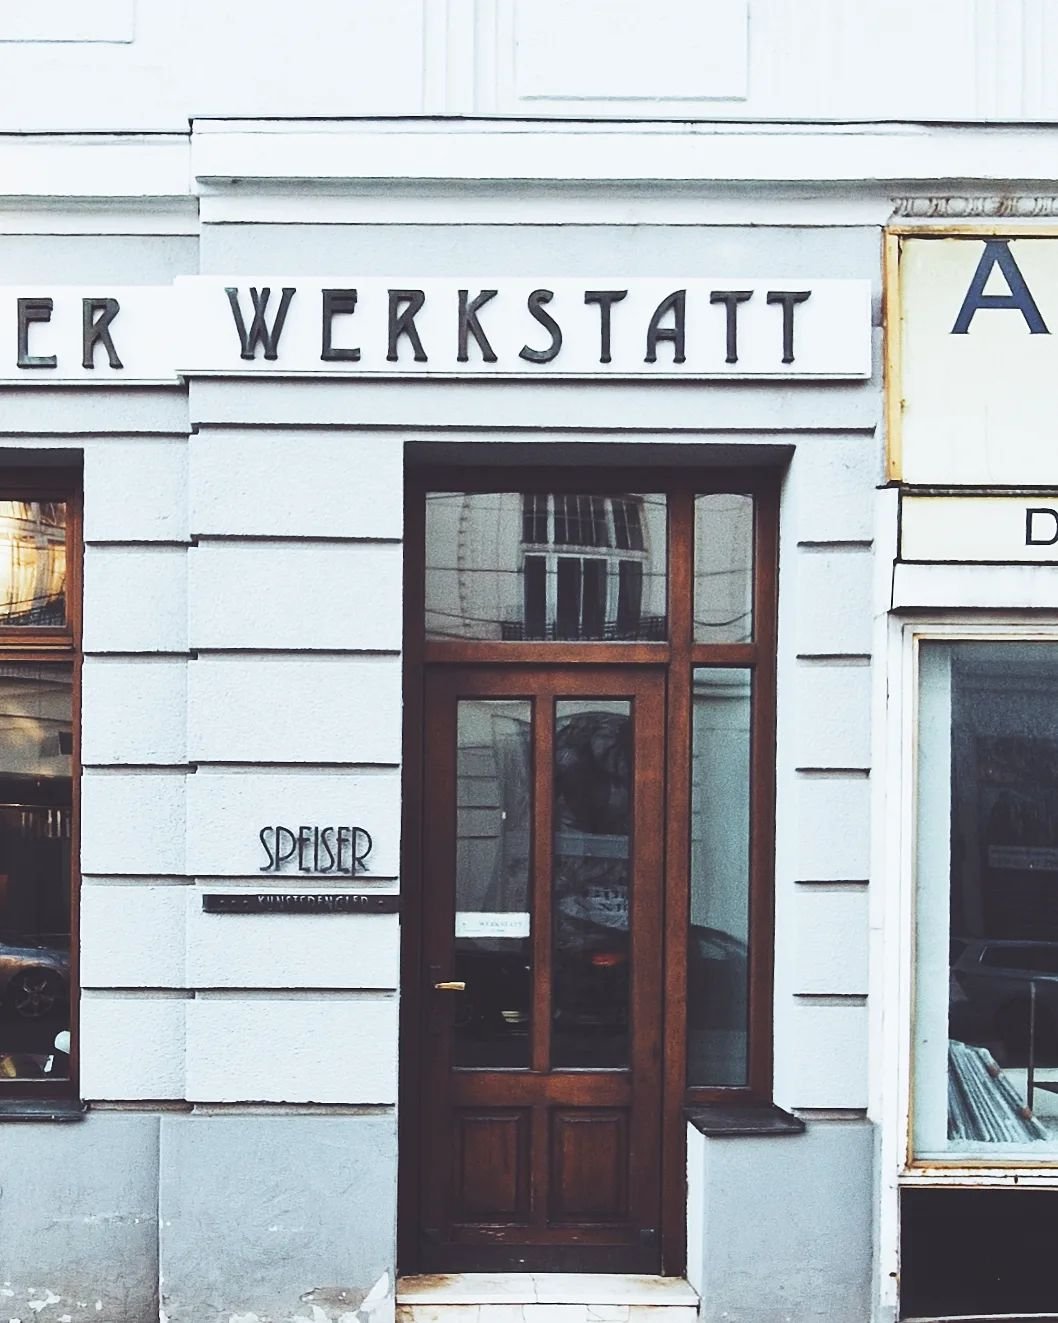 Billrothstrasse, 1190
#
#font #schrift #abc #type #typo #typografie #typography #letters #lettering #shopfront #foundtype #typeporn #dailytype #dailyfont #wien #vienna #wienfont #fontwien #curated #city #1010 #austria #storefront #shopfrontspoetry #w